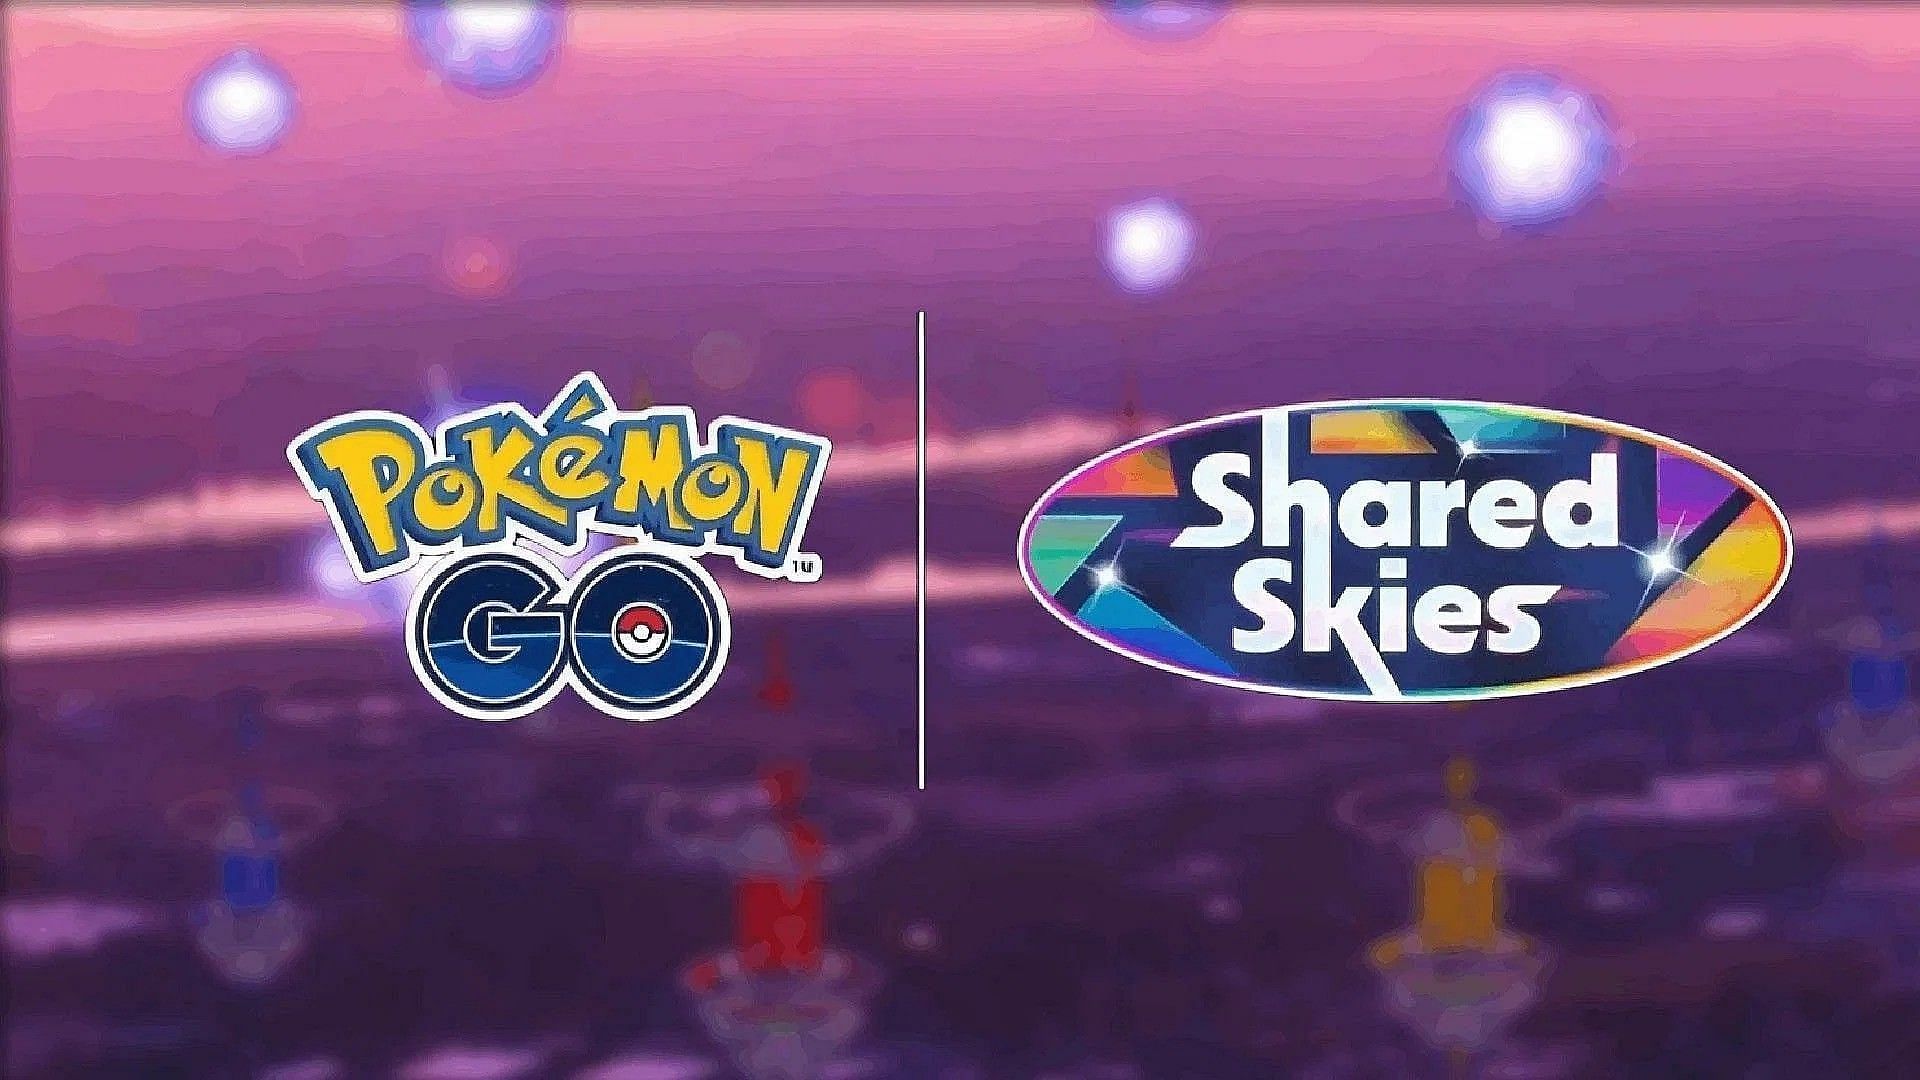 Pokemon GO Shared Skies Timed Research Part 2 tasks and rewards (Image via Niantic)